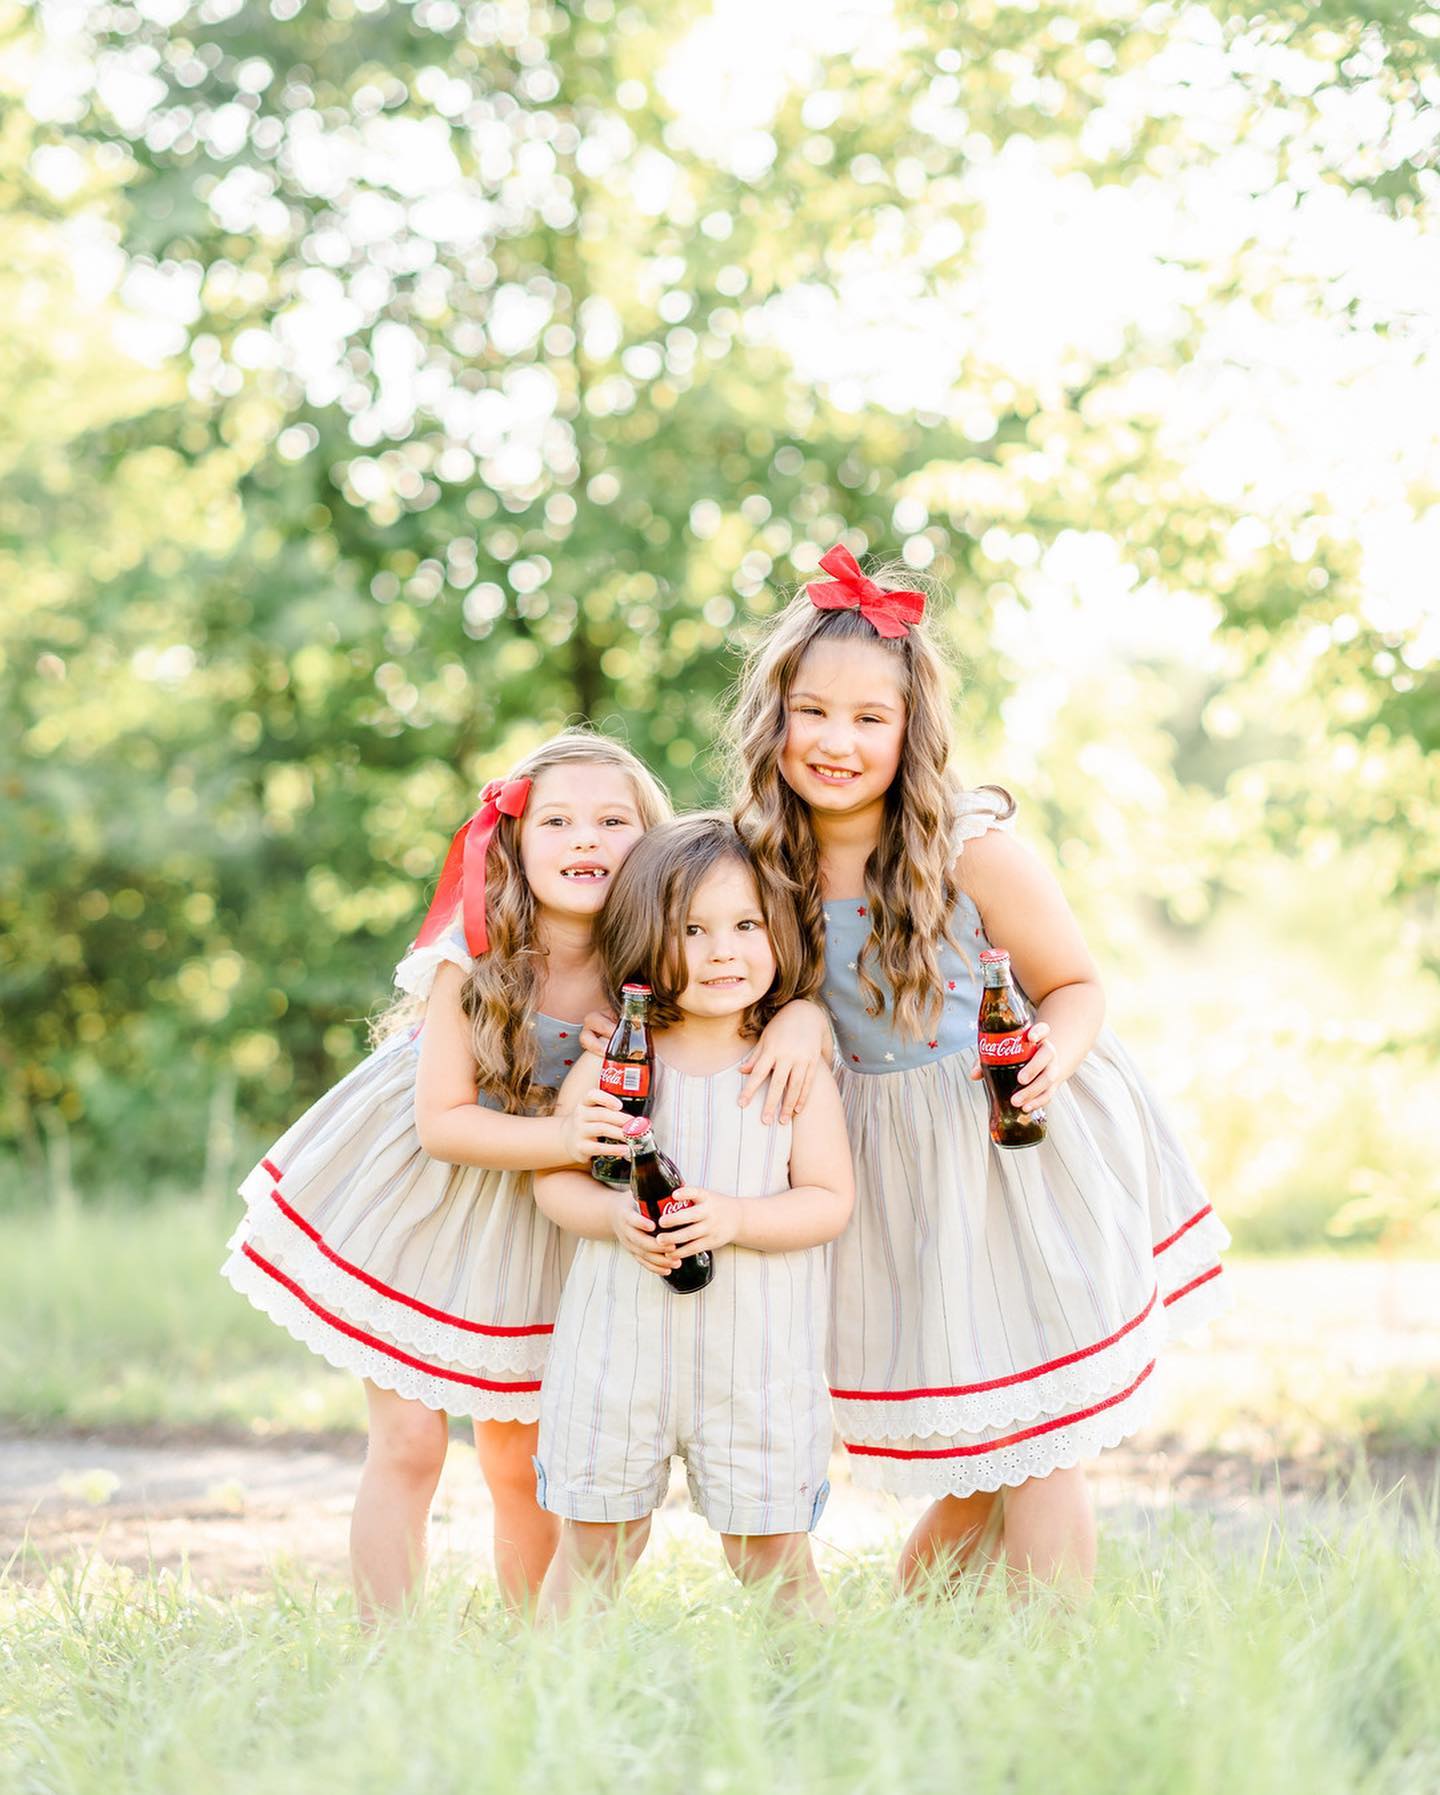 The Woodlands Texas Outdoor Children's 4th Of July Photography Session